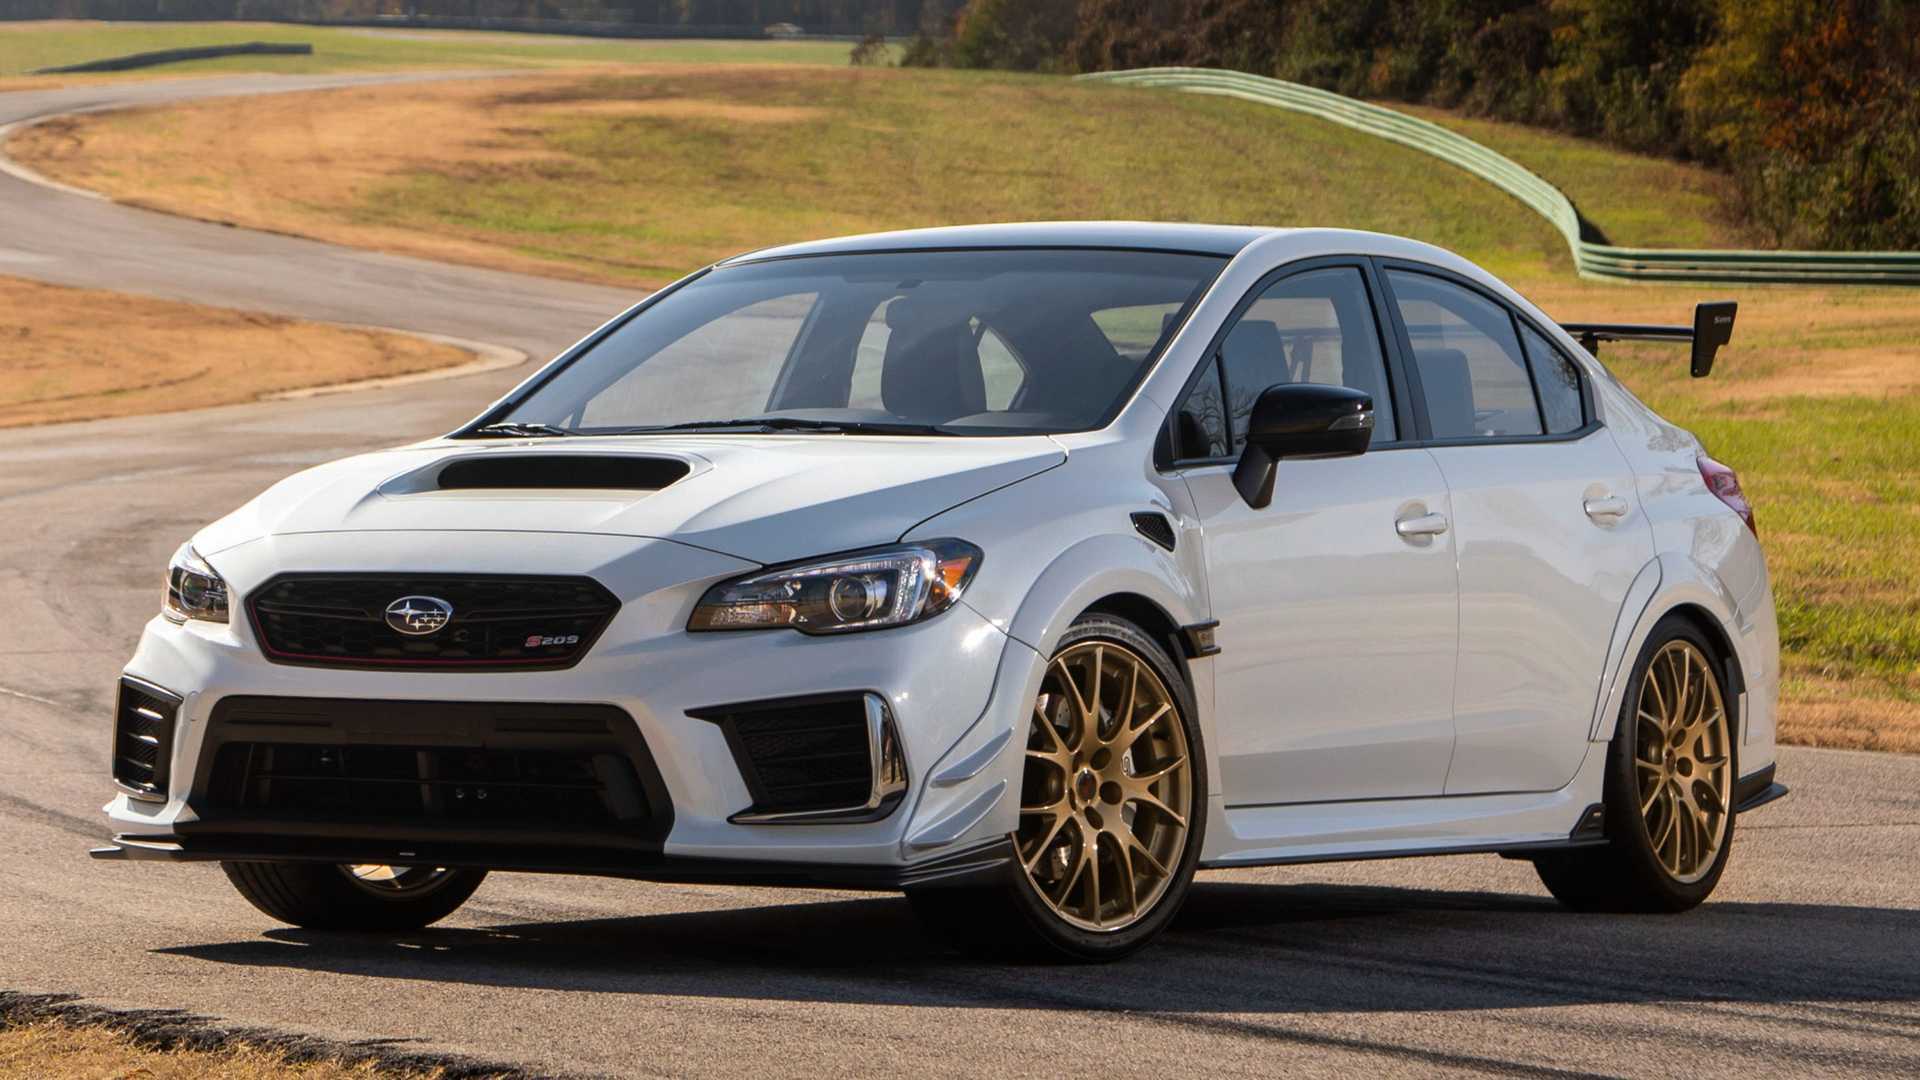 Subaru WRX STI Dropped Because Of Quickly Changing Regulations: Report